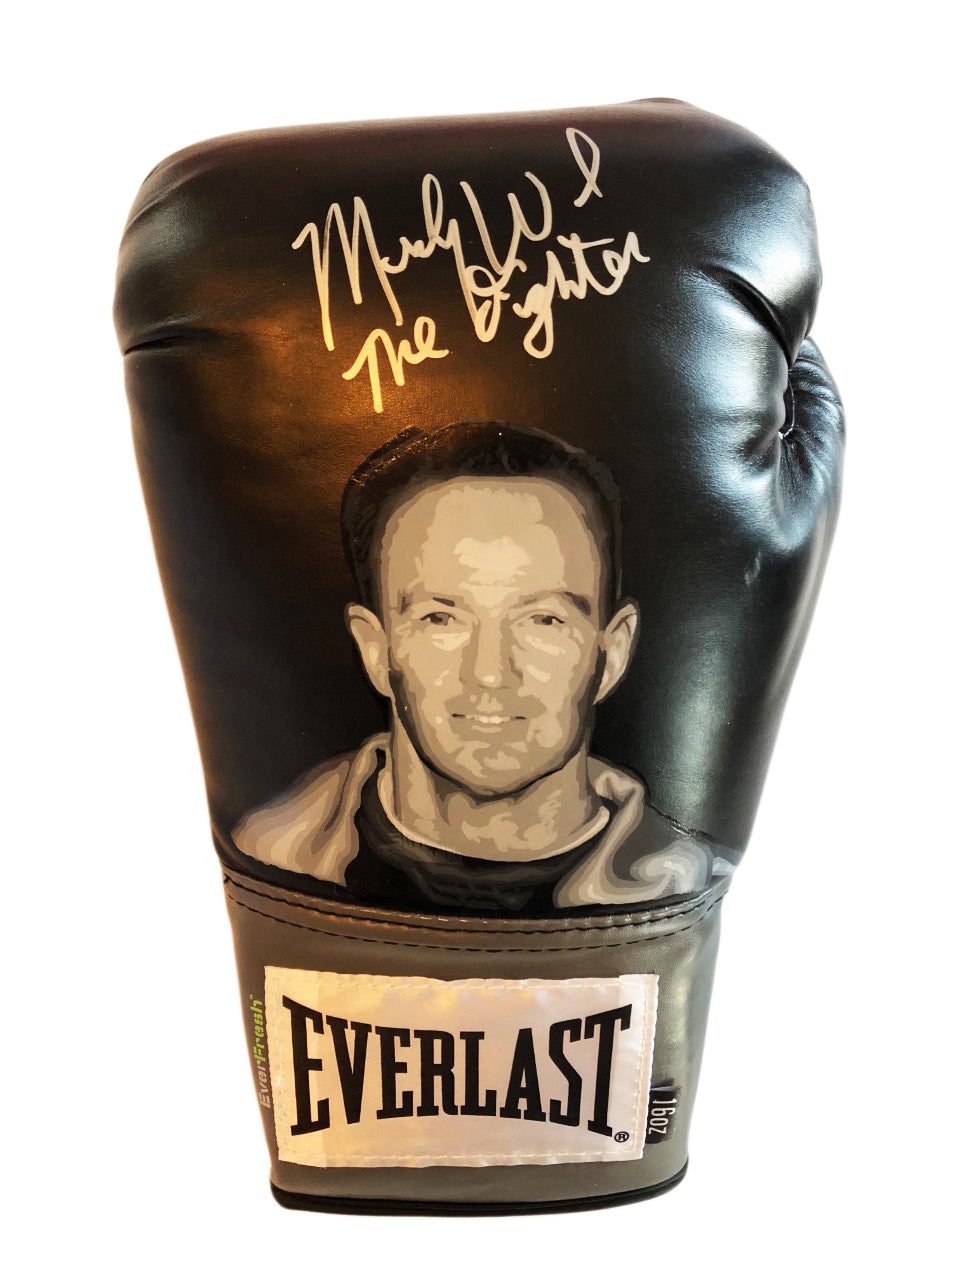 Irish Micky Ward The Fighter Signed Painted Autographed Boxing Glove